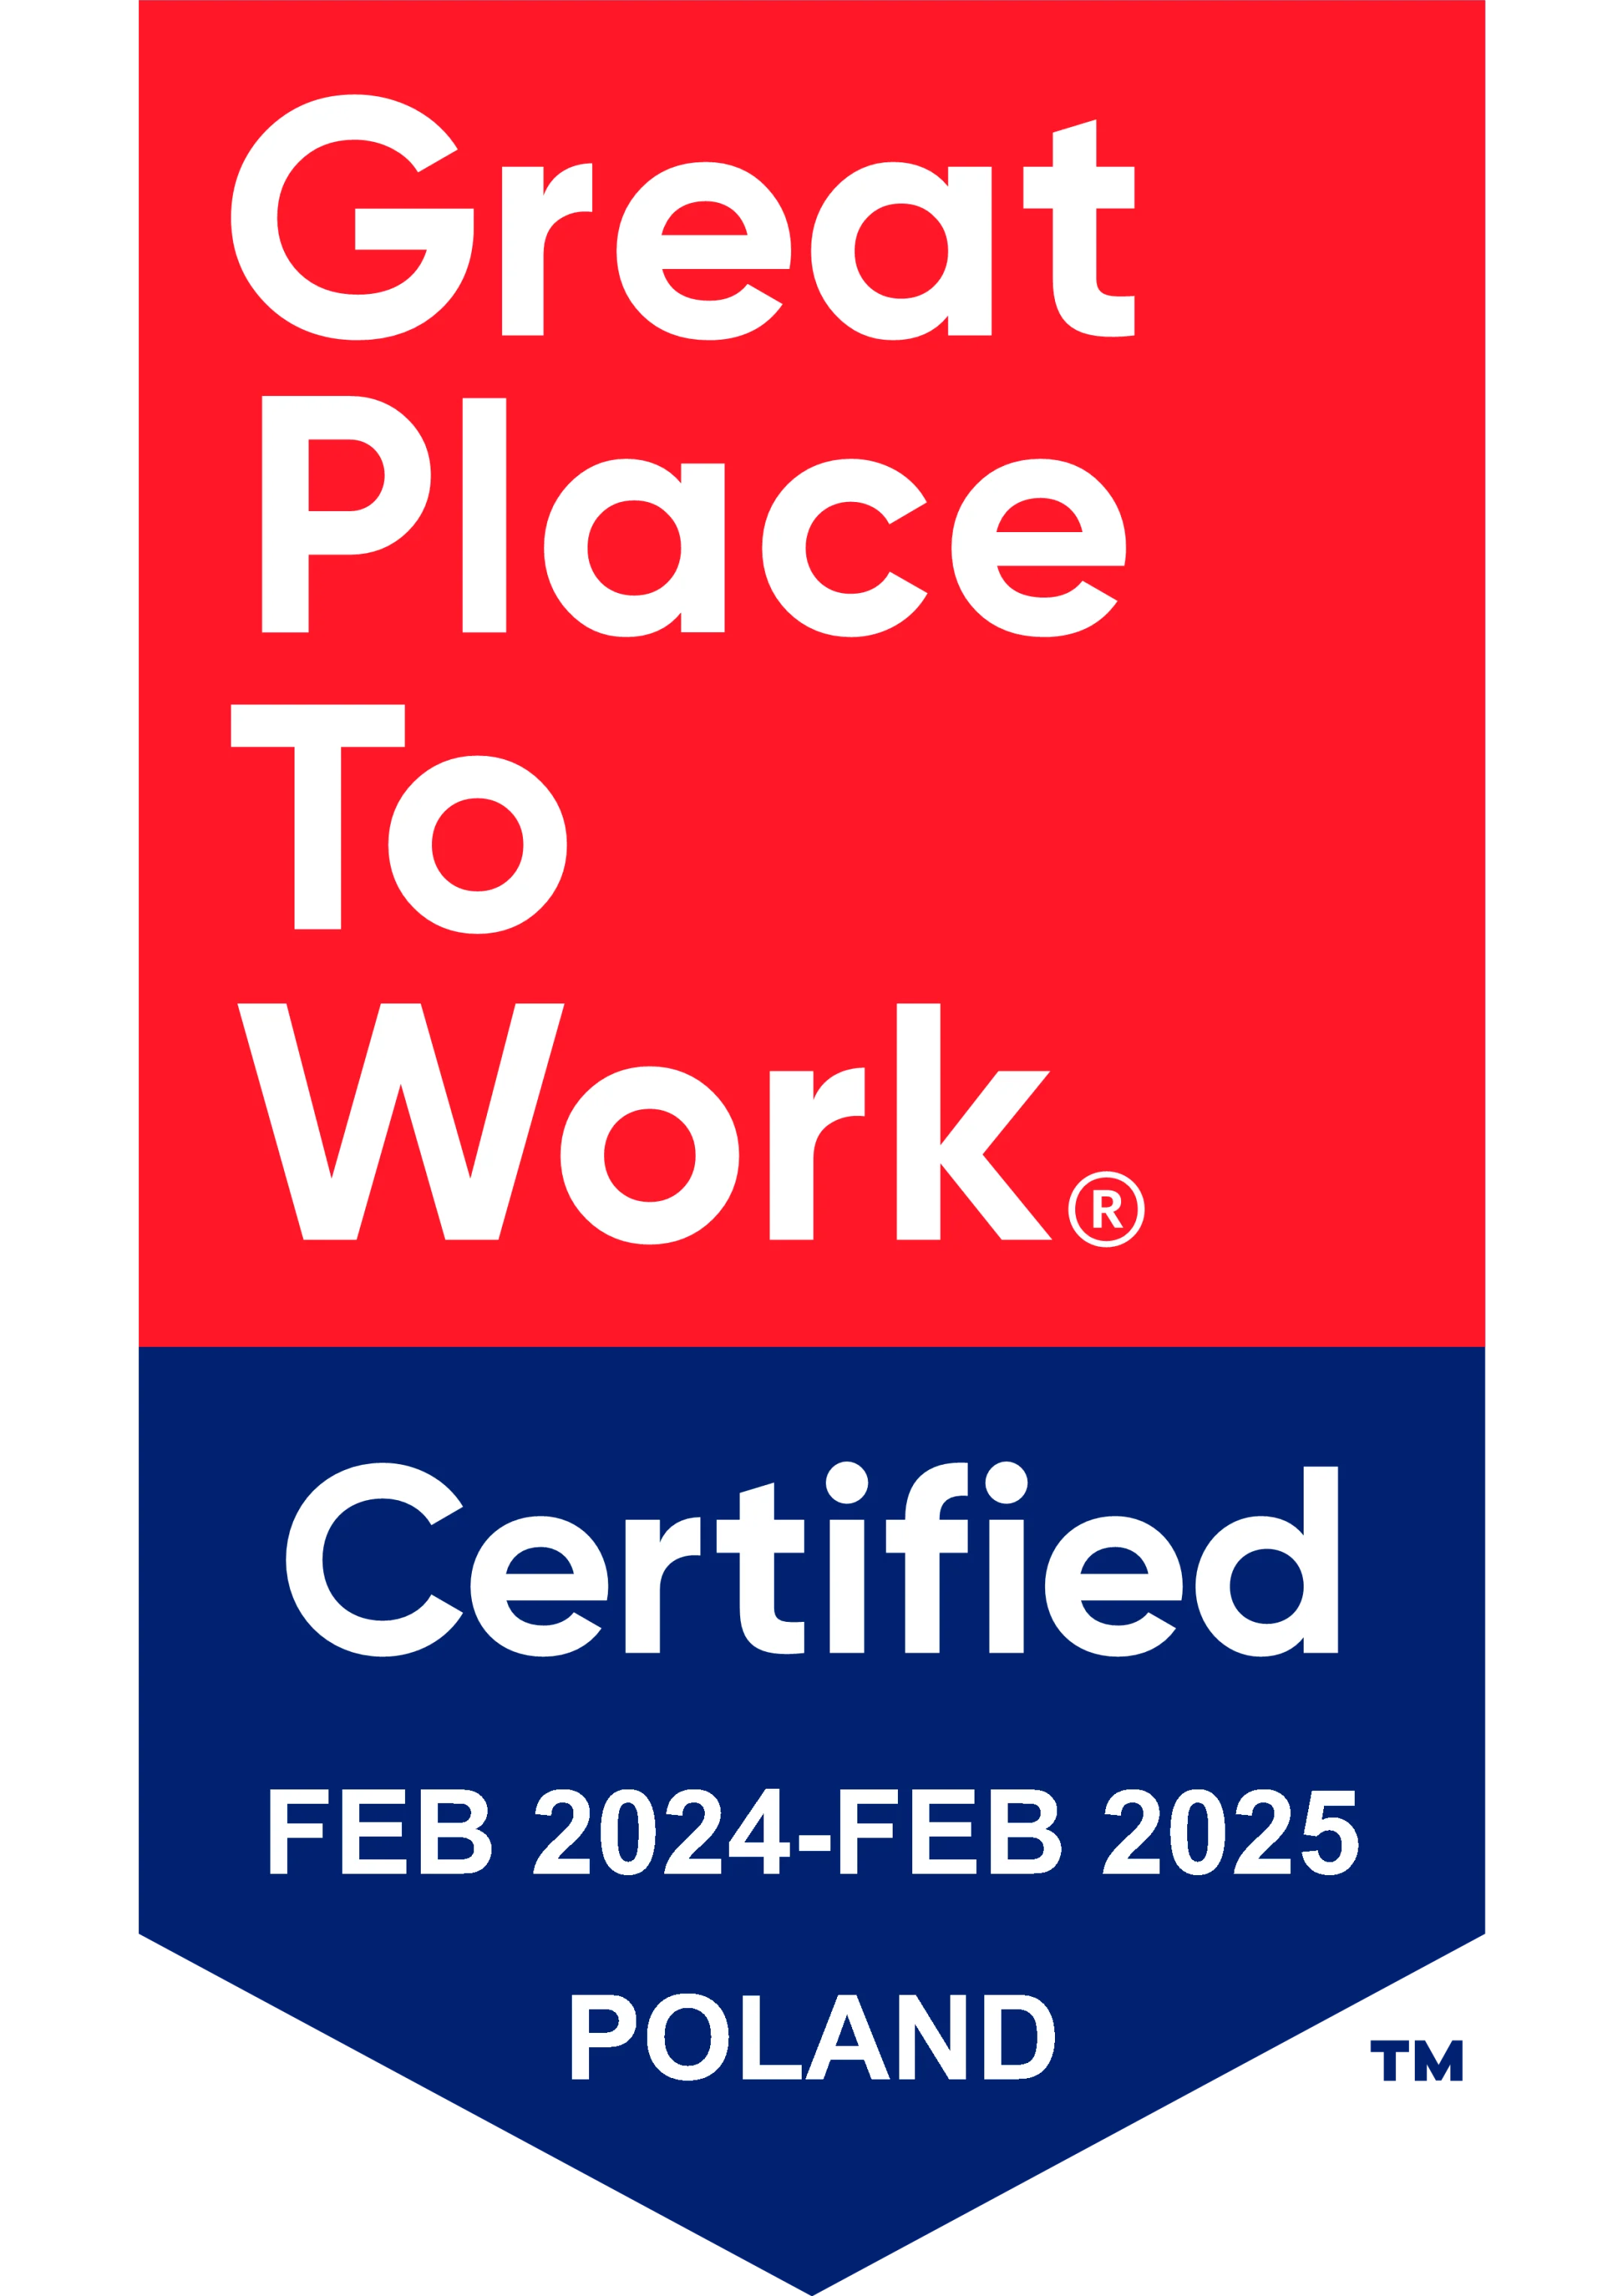 Great Place to Work Poland badge